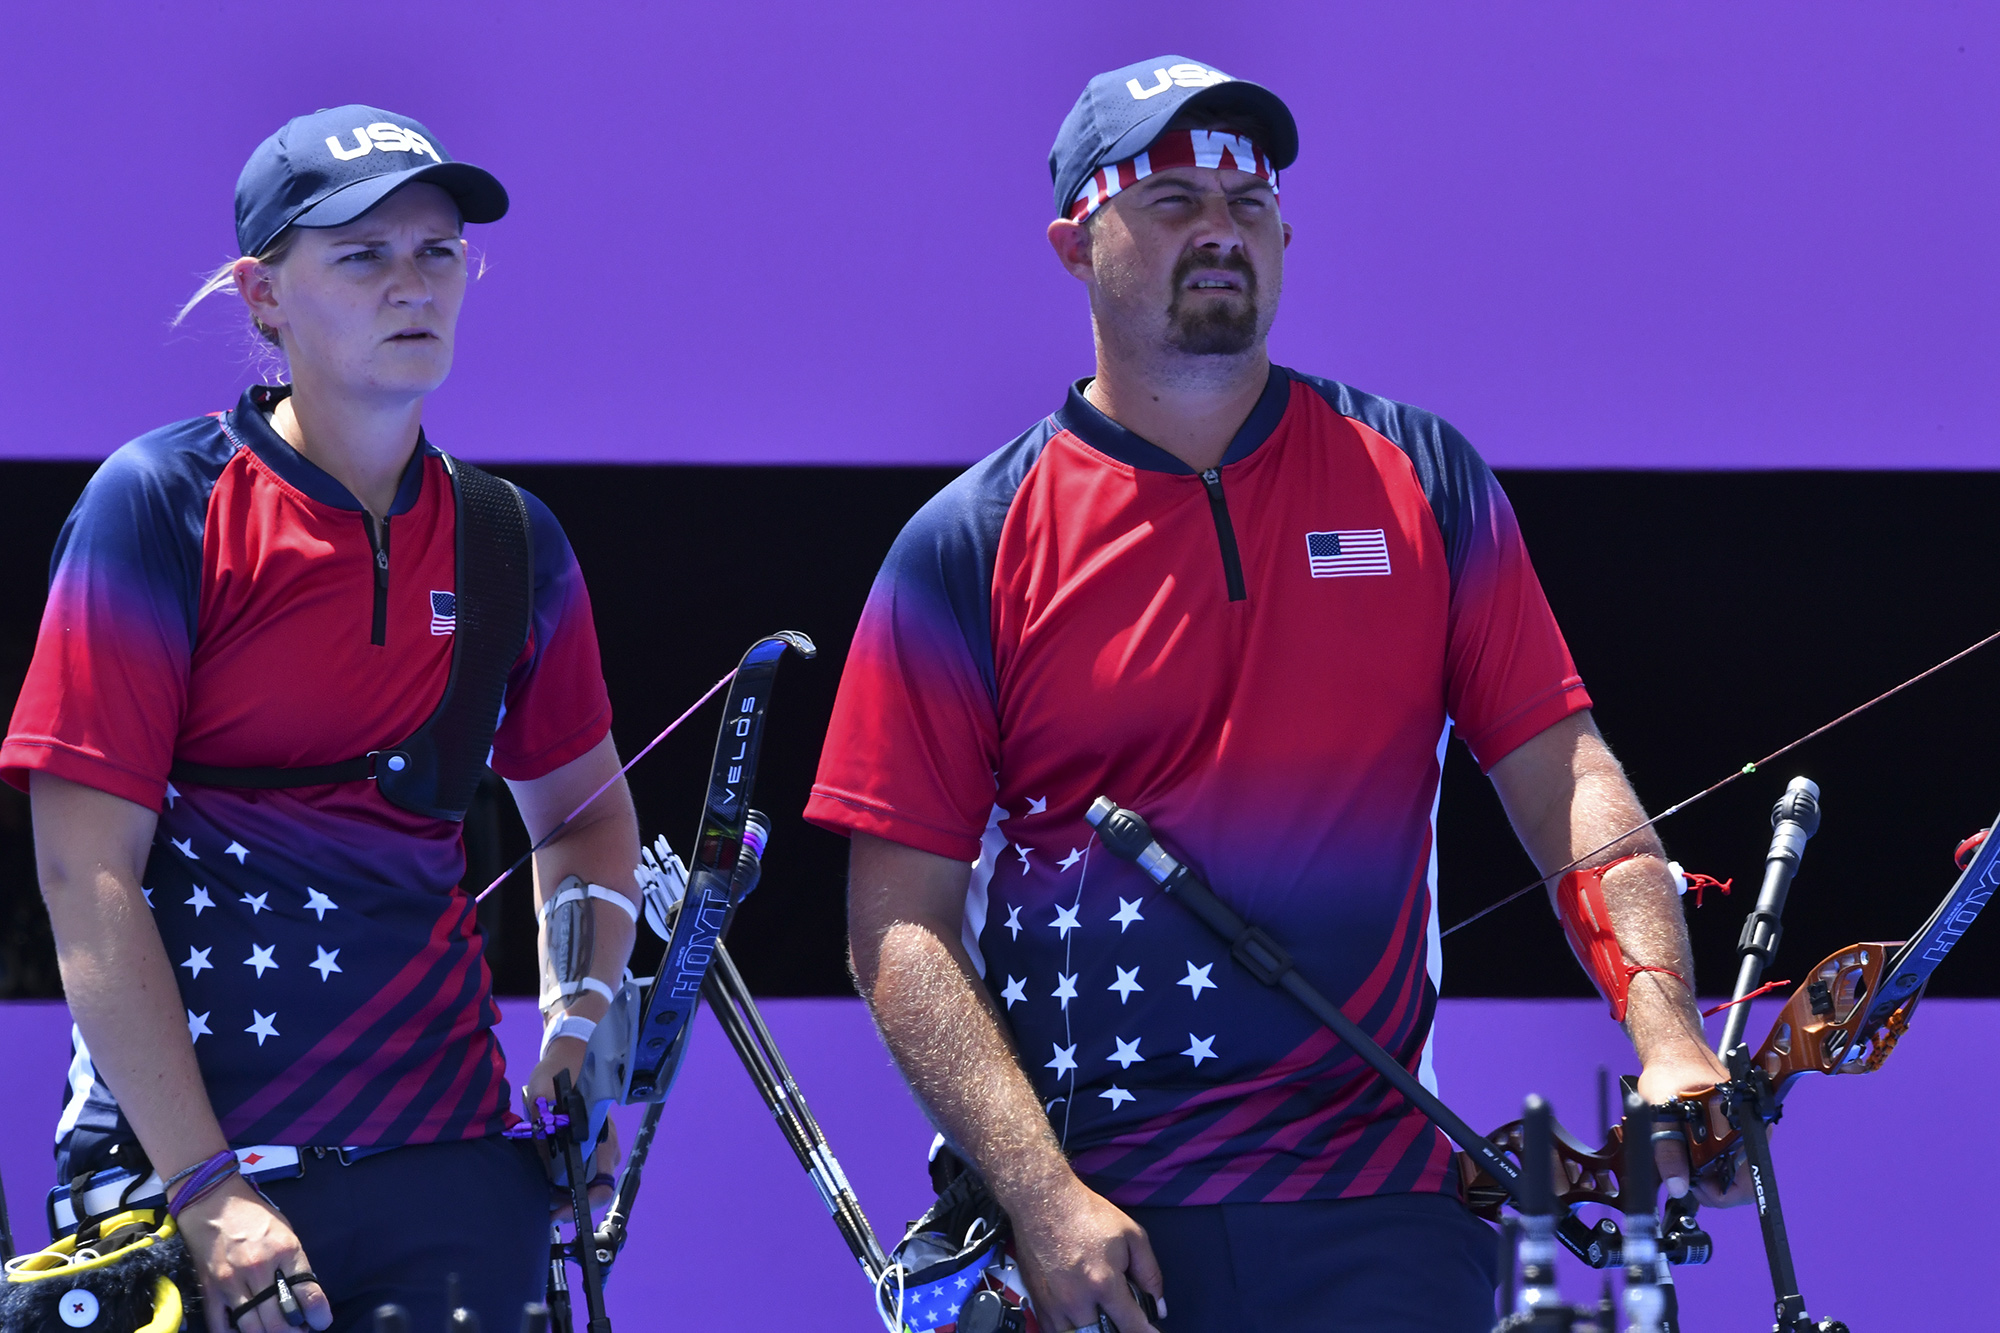 Tokyo 2020 Olympics - Archery - Mixed Team - 1/8 Finals - Yumenoshima Archery Field, Tokyo, Japan - July 24, 2021. Mackenzie Brown of the United States and Brady Ellison of the United States during competition REUTERS/Clodagh Kilcoyne